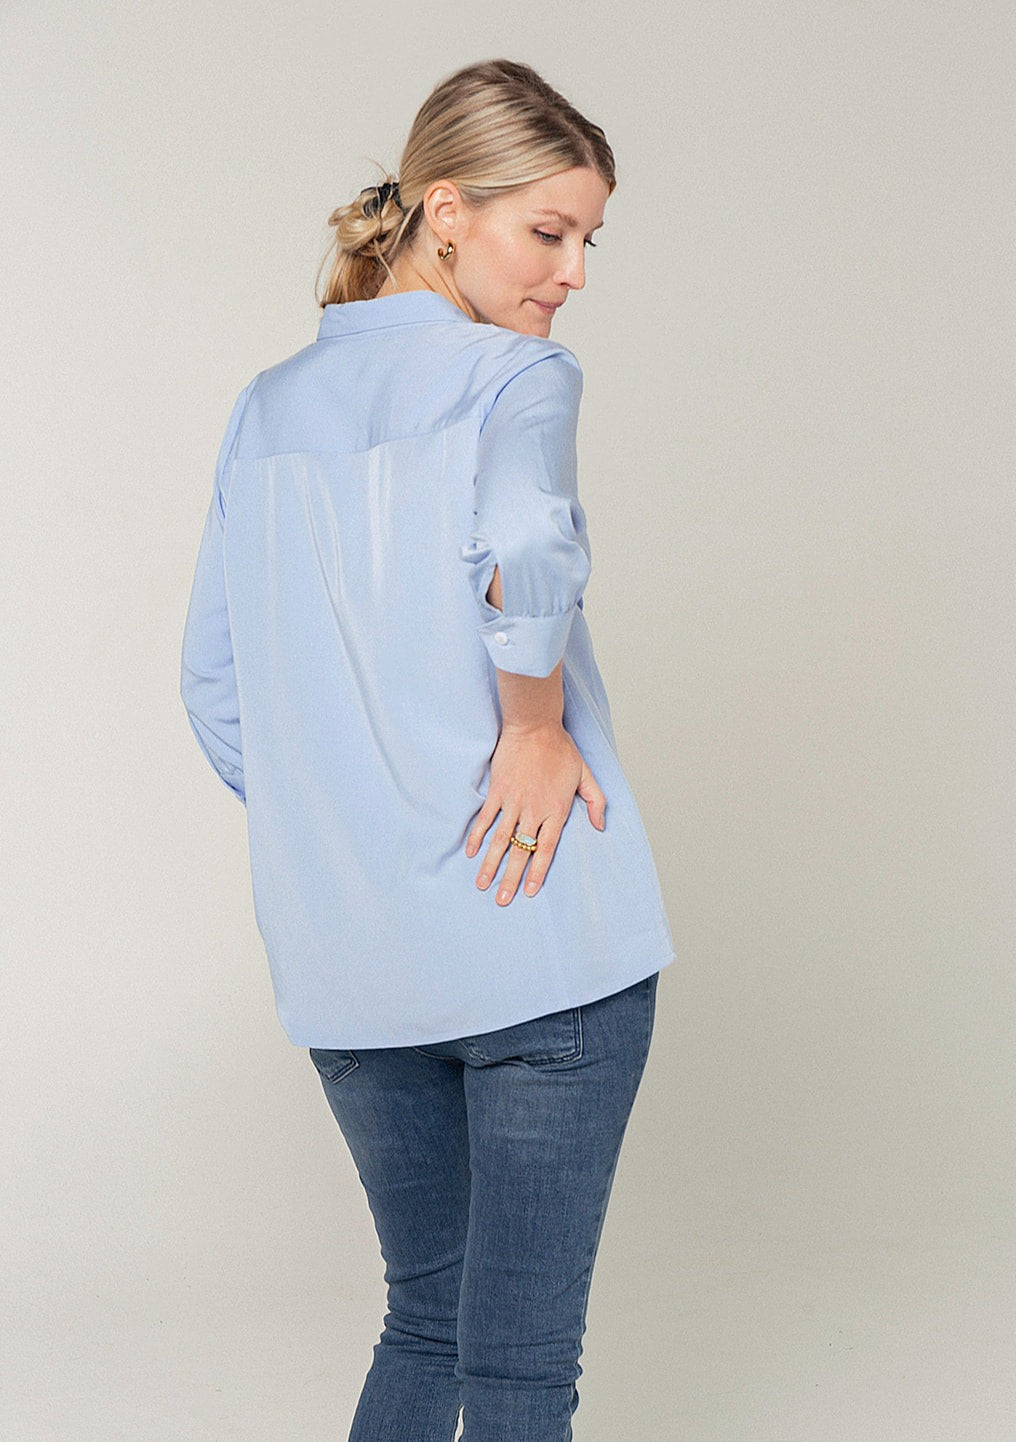 Maternity button down blouse by MARION. Nursing top in pale blue. Maternity office wear, Sustainable, in petite and standard sizes.